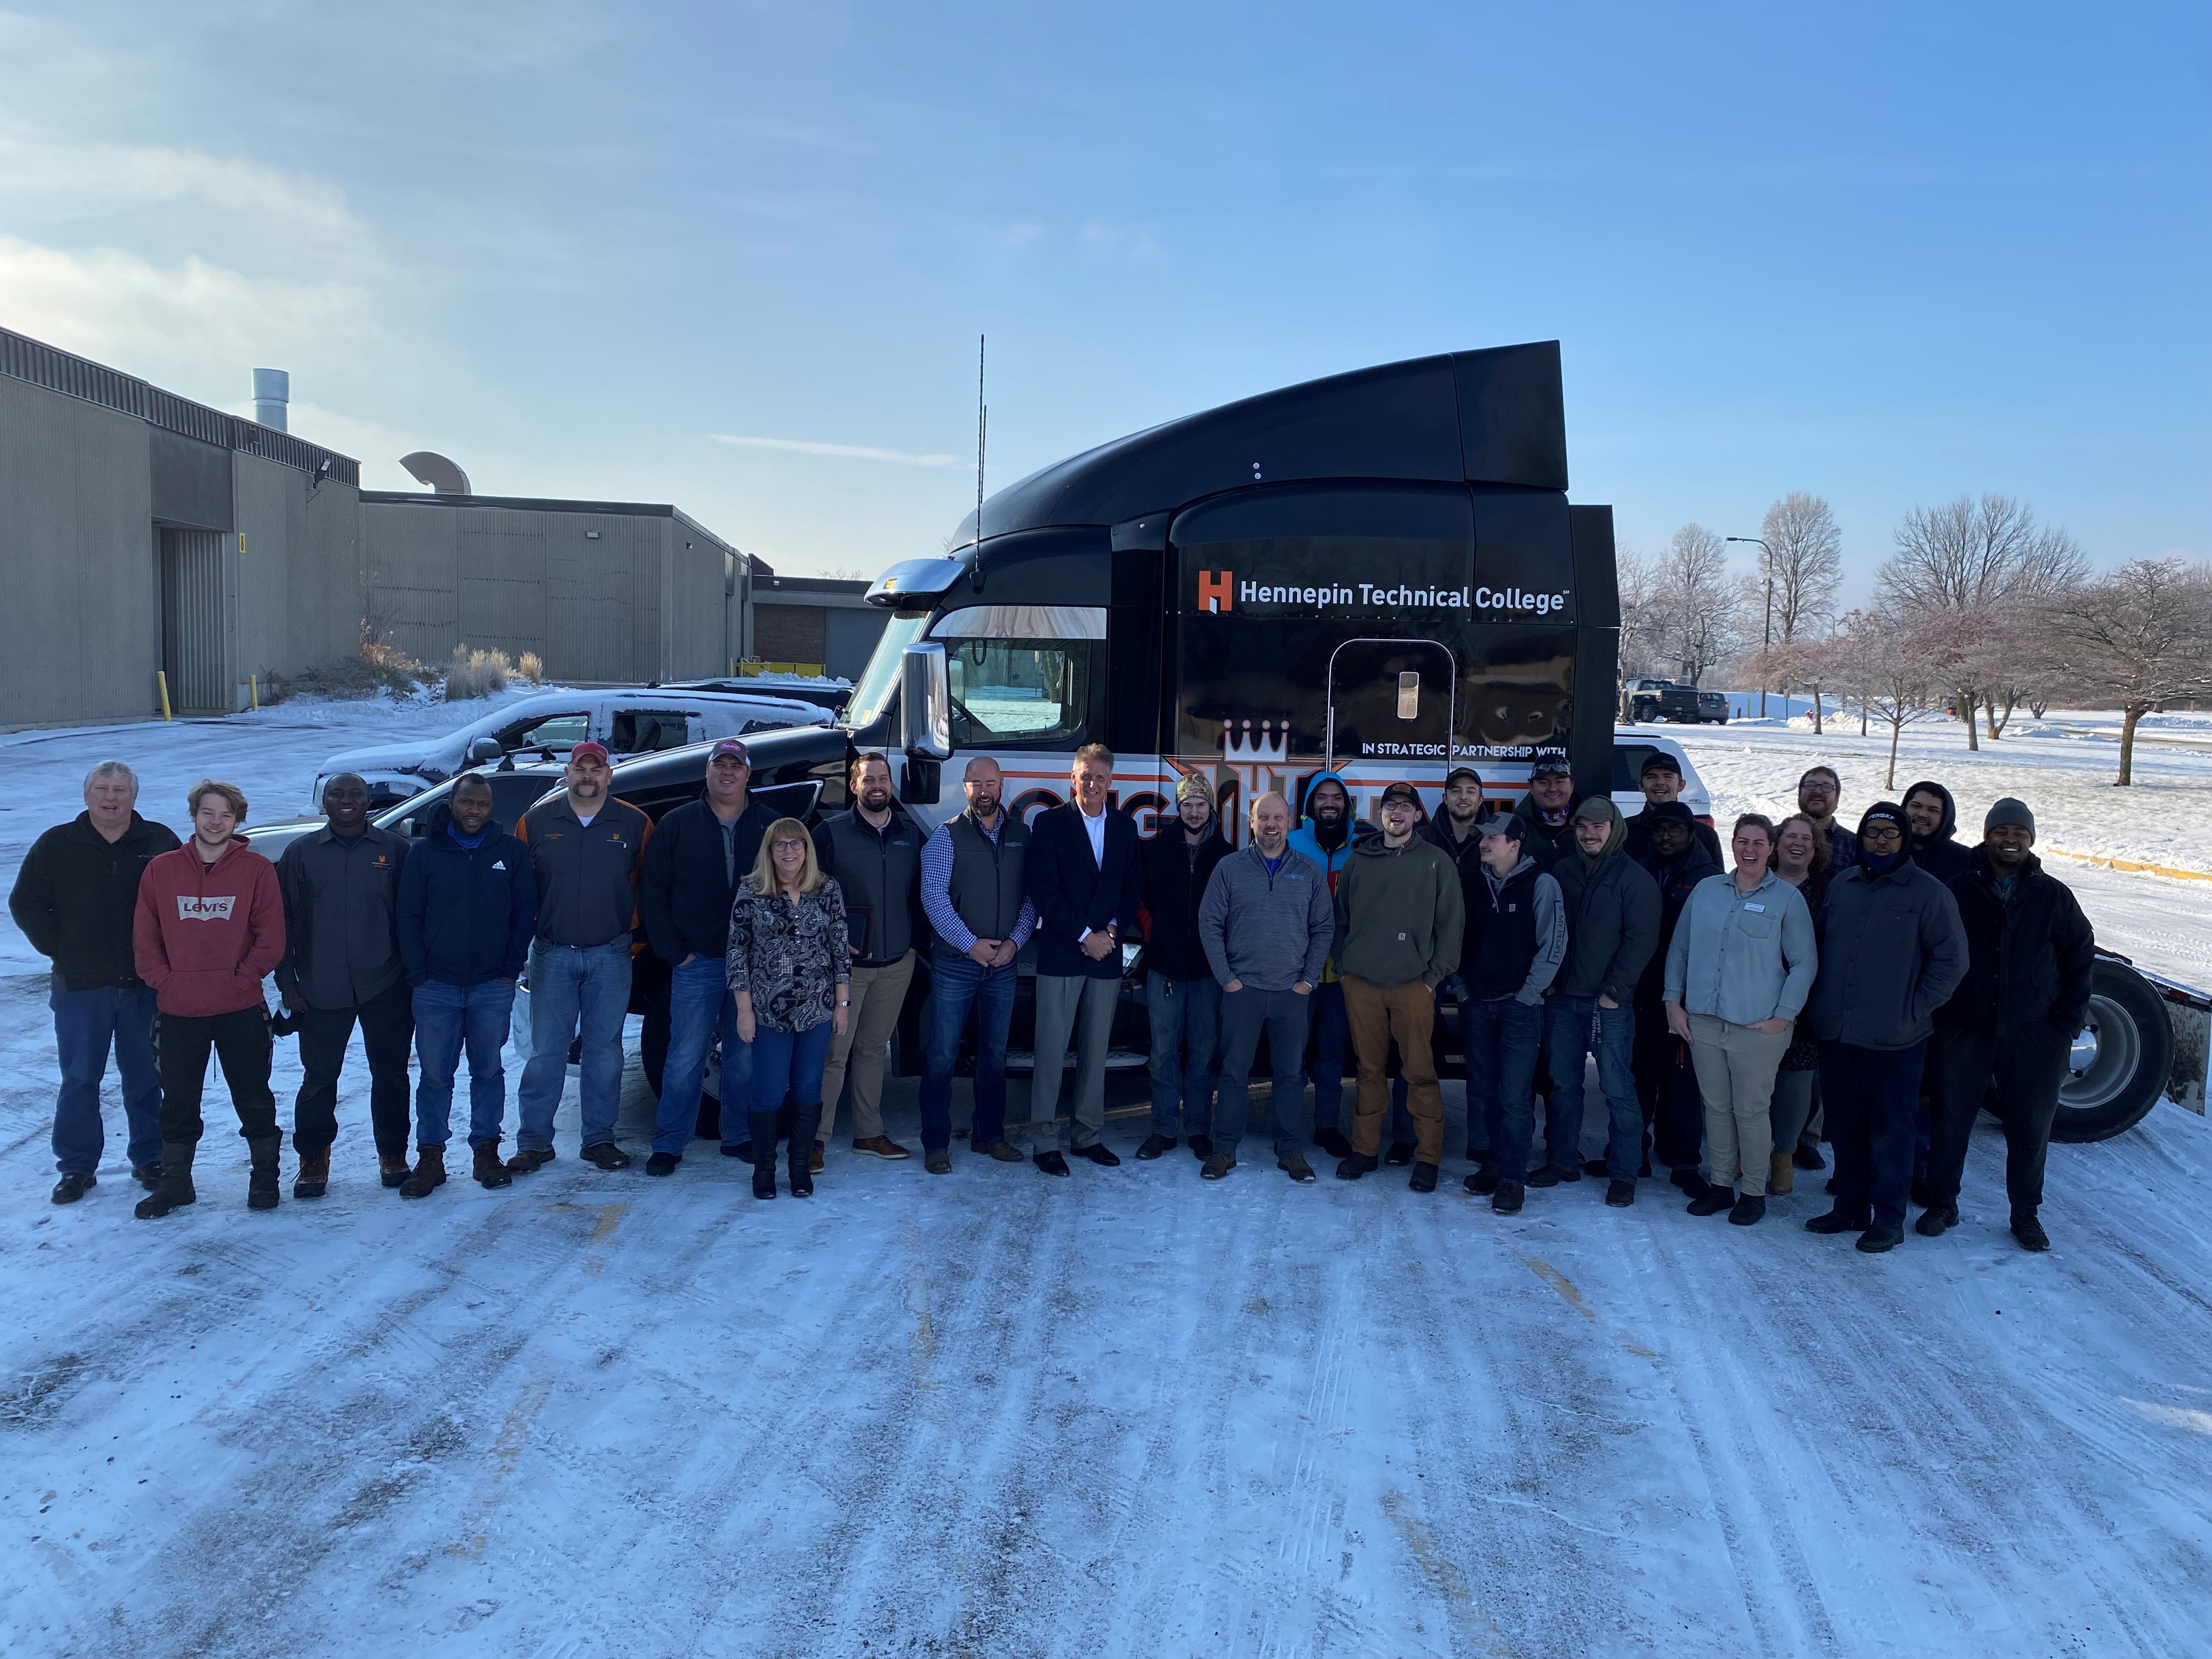 Donated 2017 Peterbuilt Truck with students and faculty